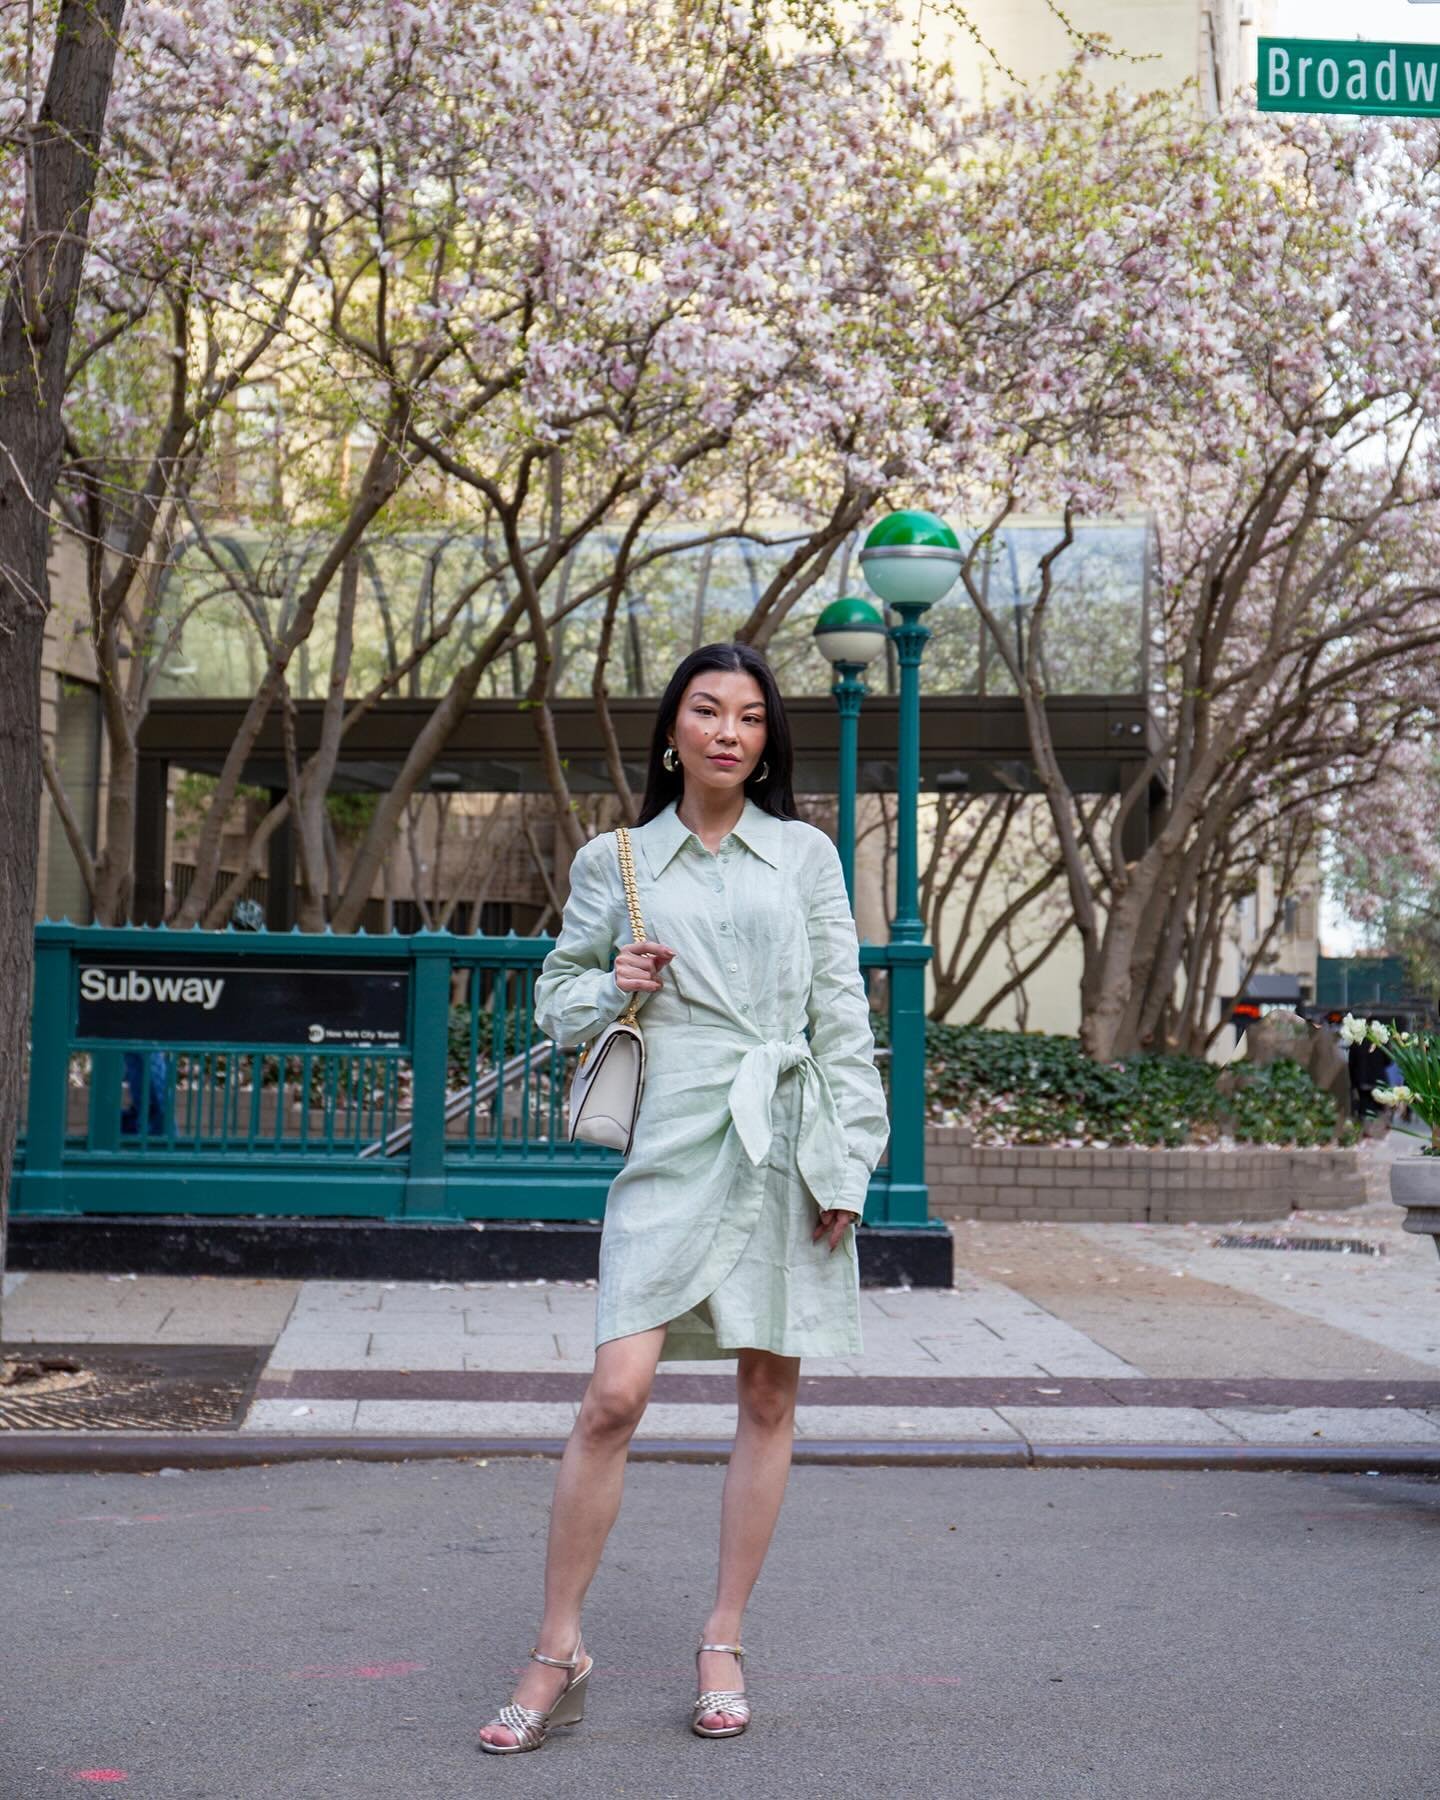 Springing ✨👗🌸
Dress: @darling 
15% off with code SUZANNES

Not only do I love the uniqueness in its color, but also the fit and design details. The waist tie gives options for comfort and style, and the front and sleeve buttons allow versatility wi